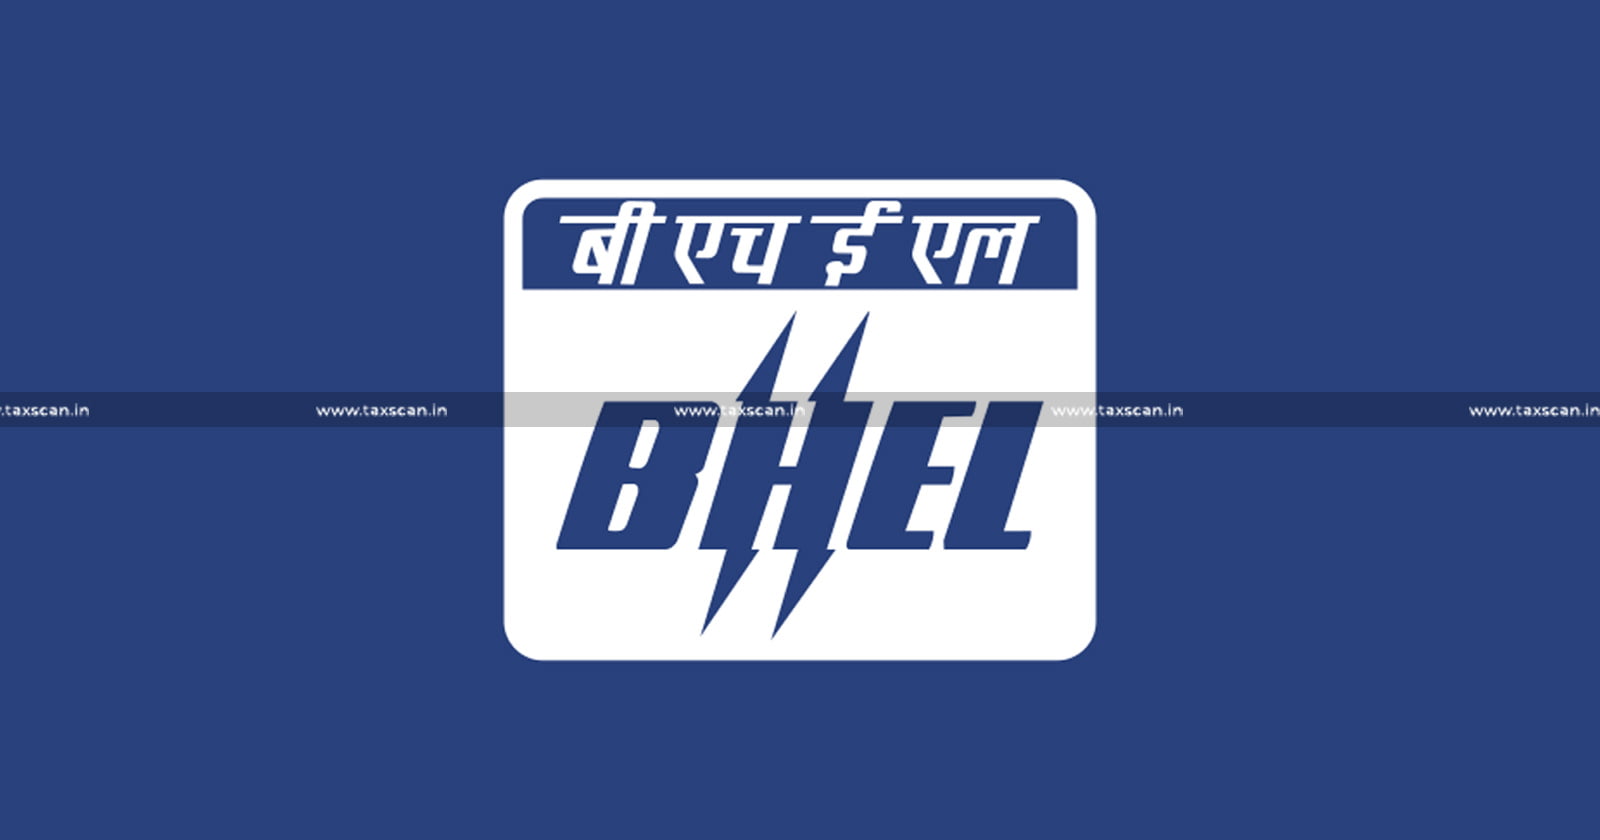 Excise Duty - BHEL - Bharat Heavy Electricals Limited - TAXSCAN